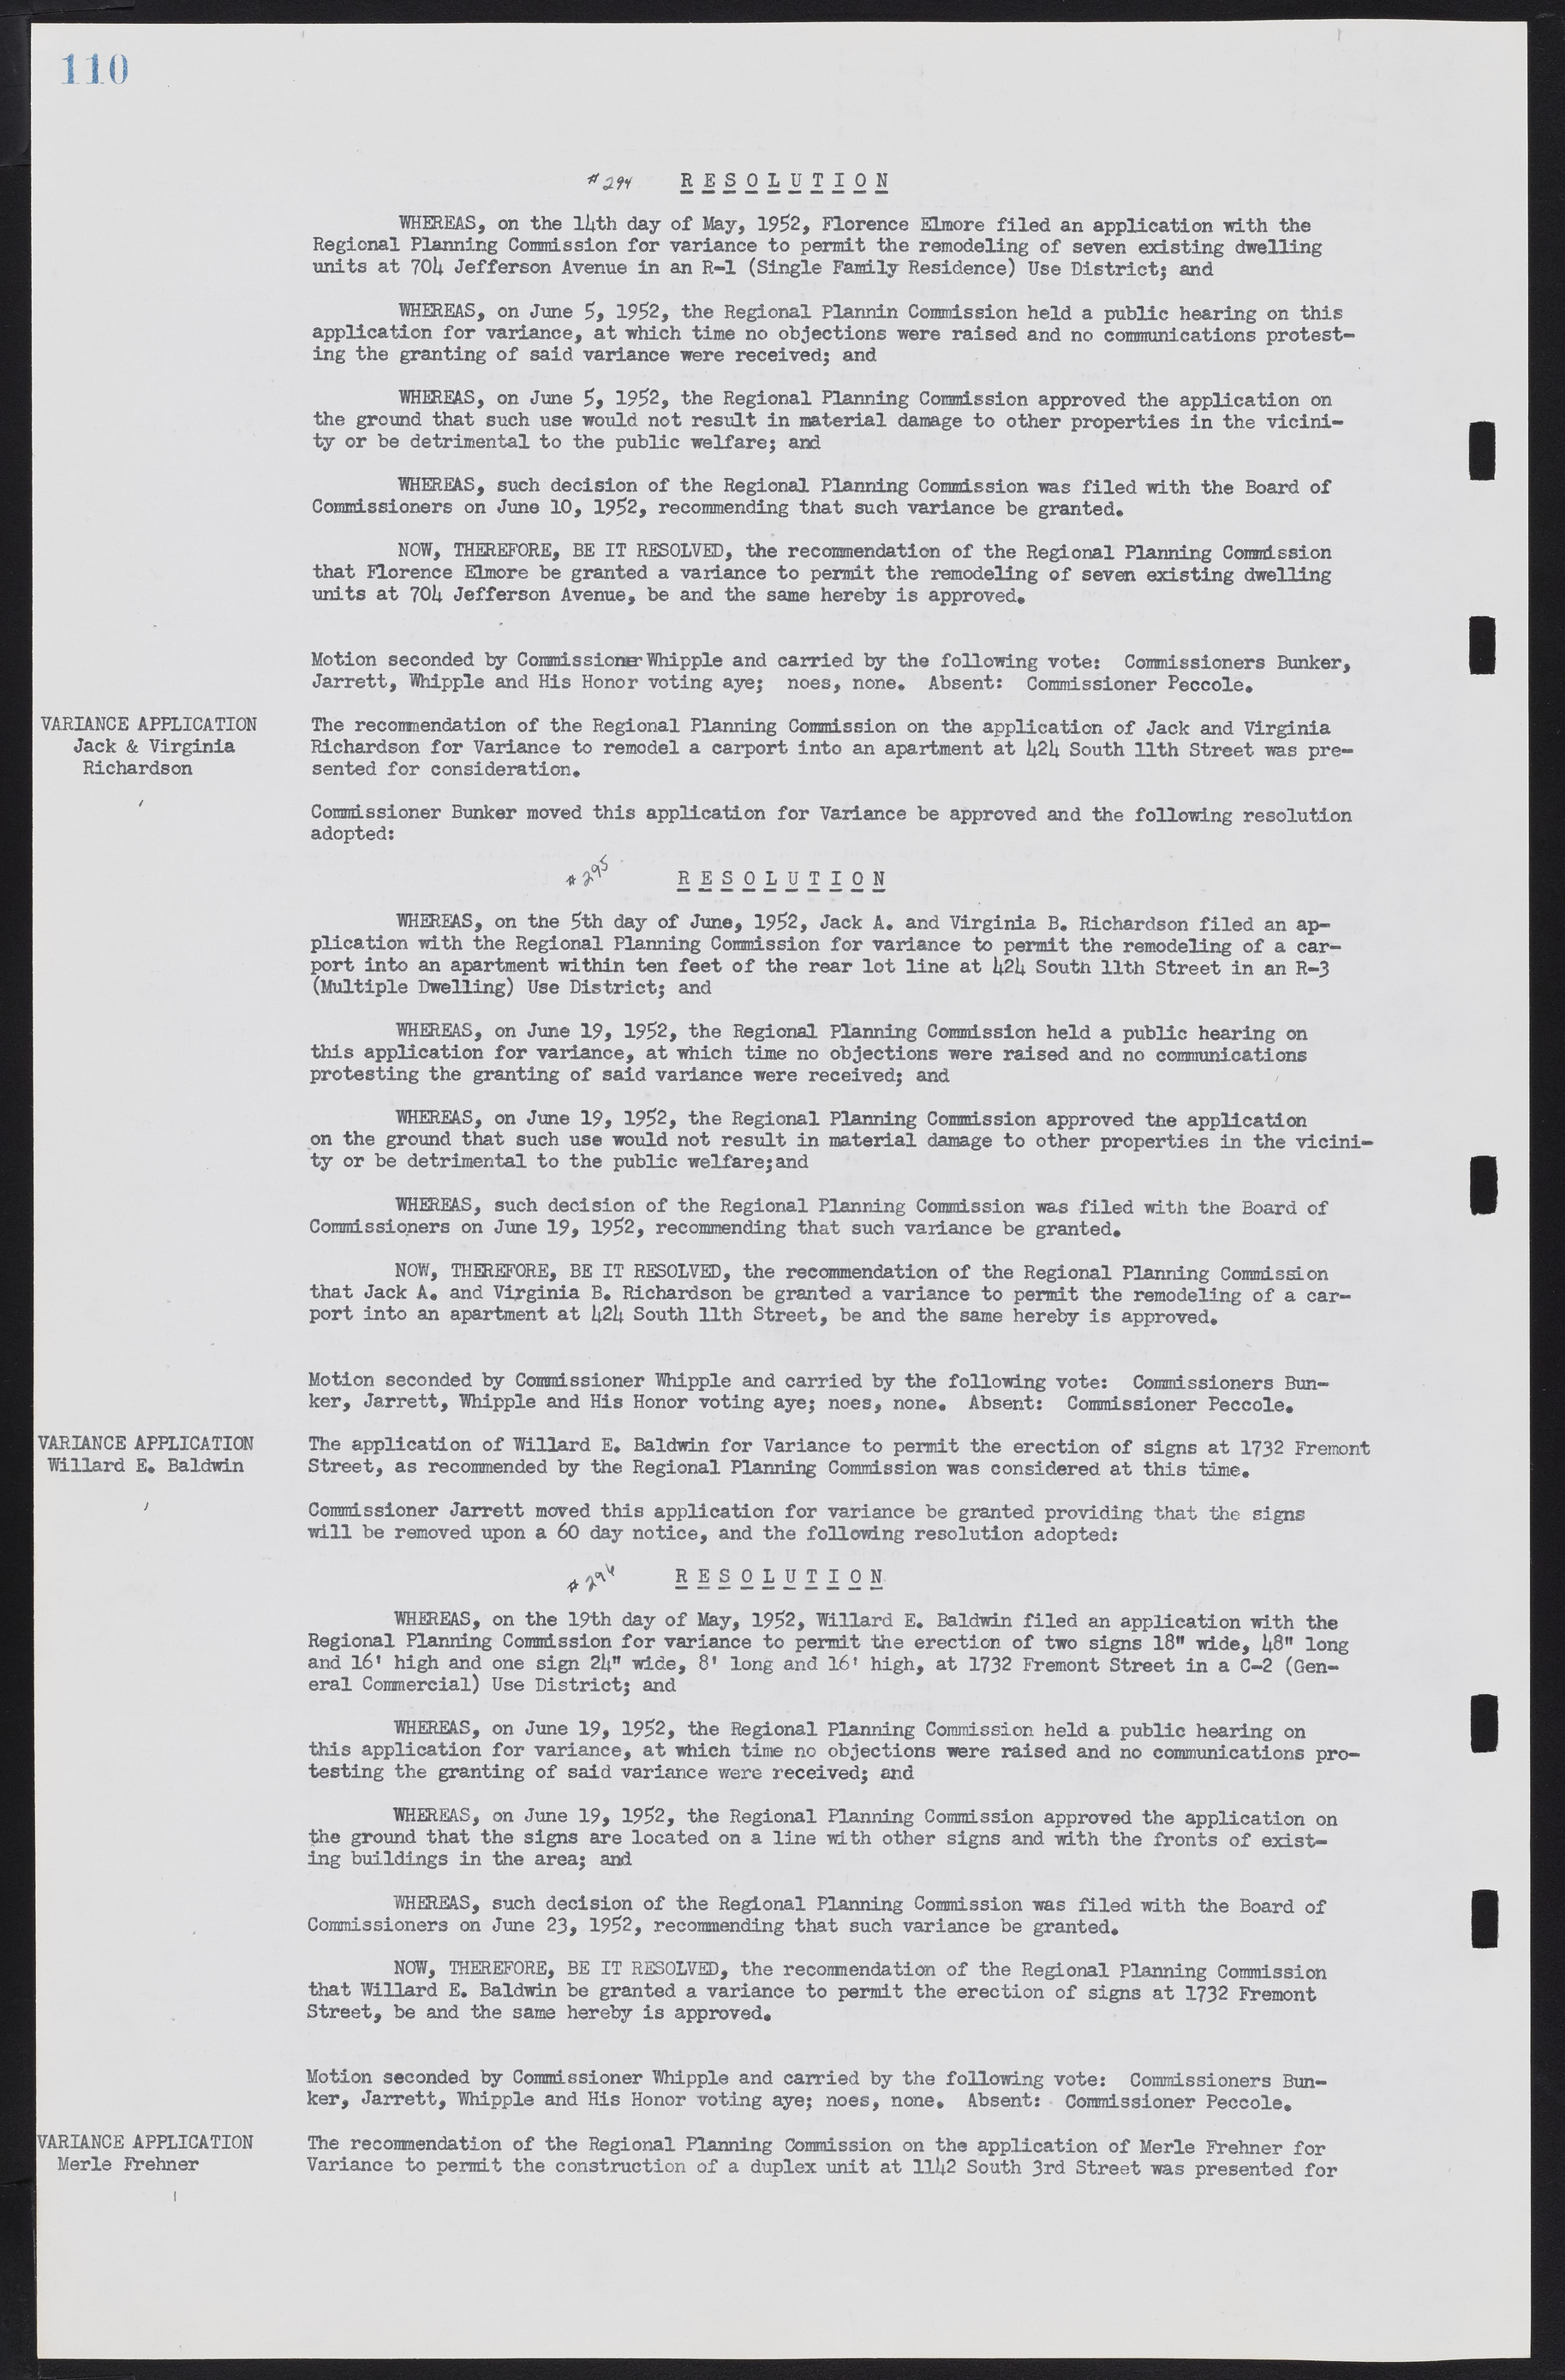 Las Vegas City Commission Minutes, May 26, 1952 to February 17, 1954, lvc000008-116